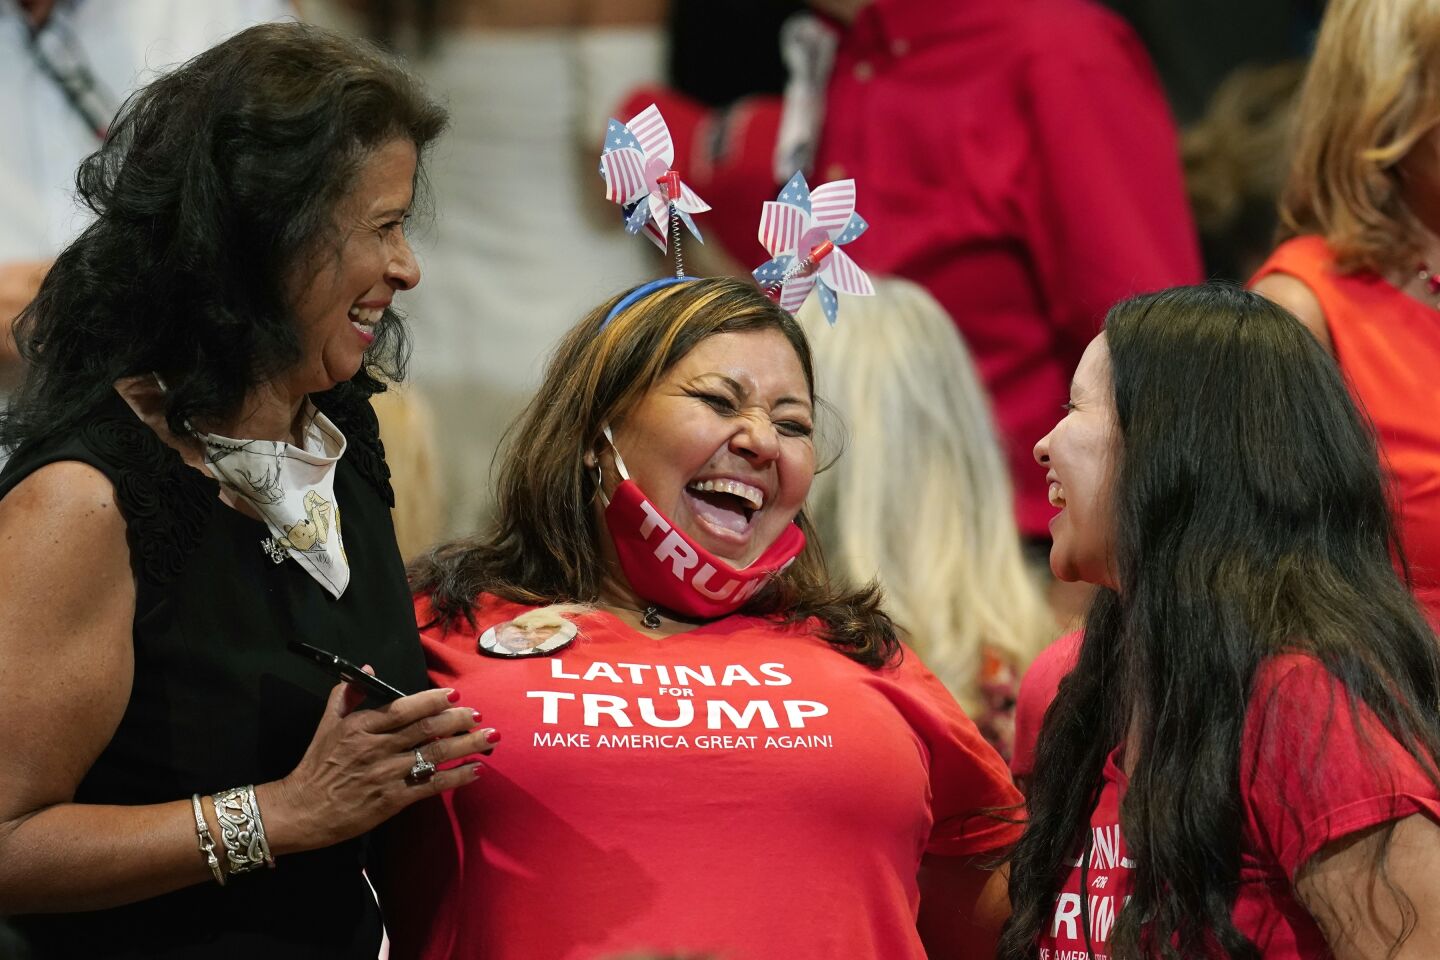 President Trump supporters at a Latinos for Trump Coalition event in Phoenix.